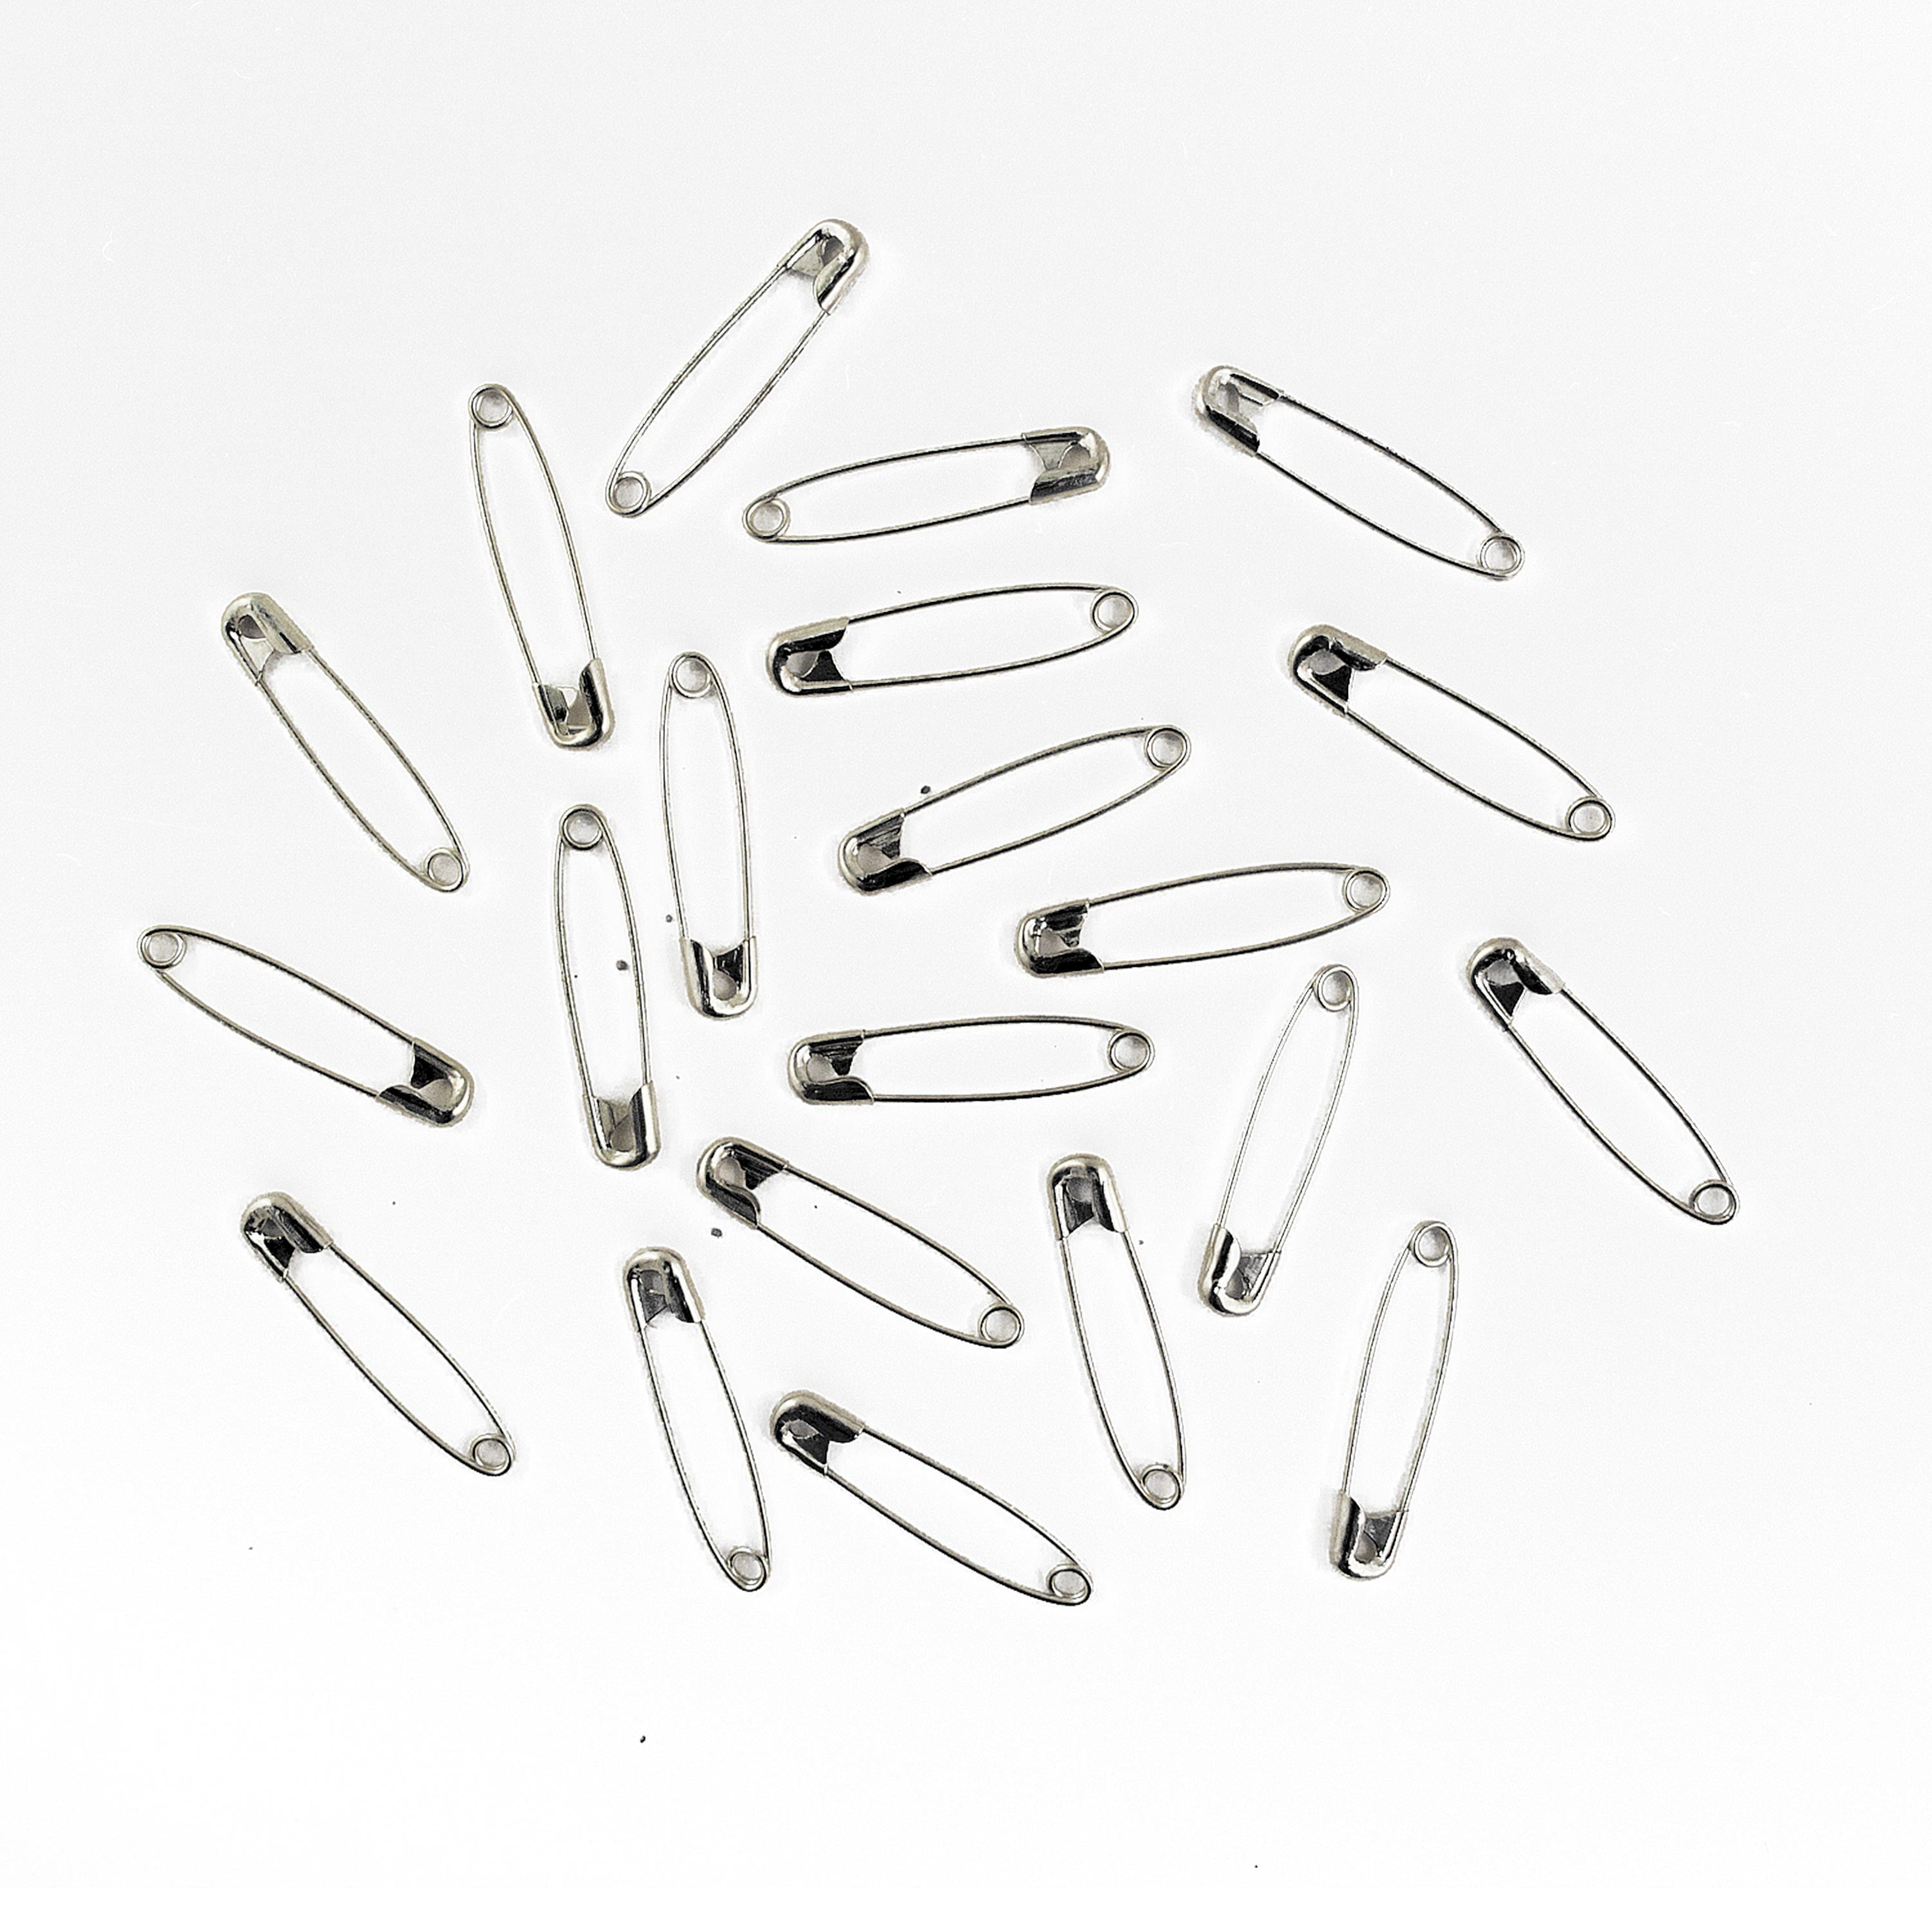 Silver Small Safety Pins Size 00 - 0.75 Inch 144 Pieces 